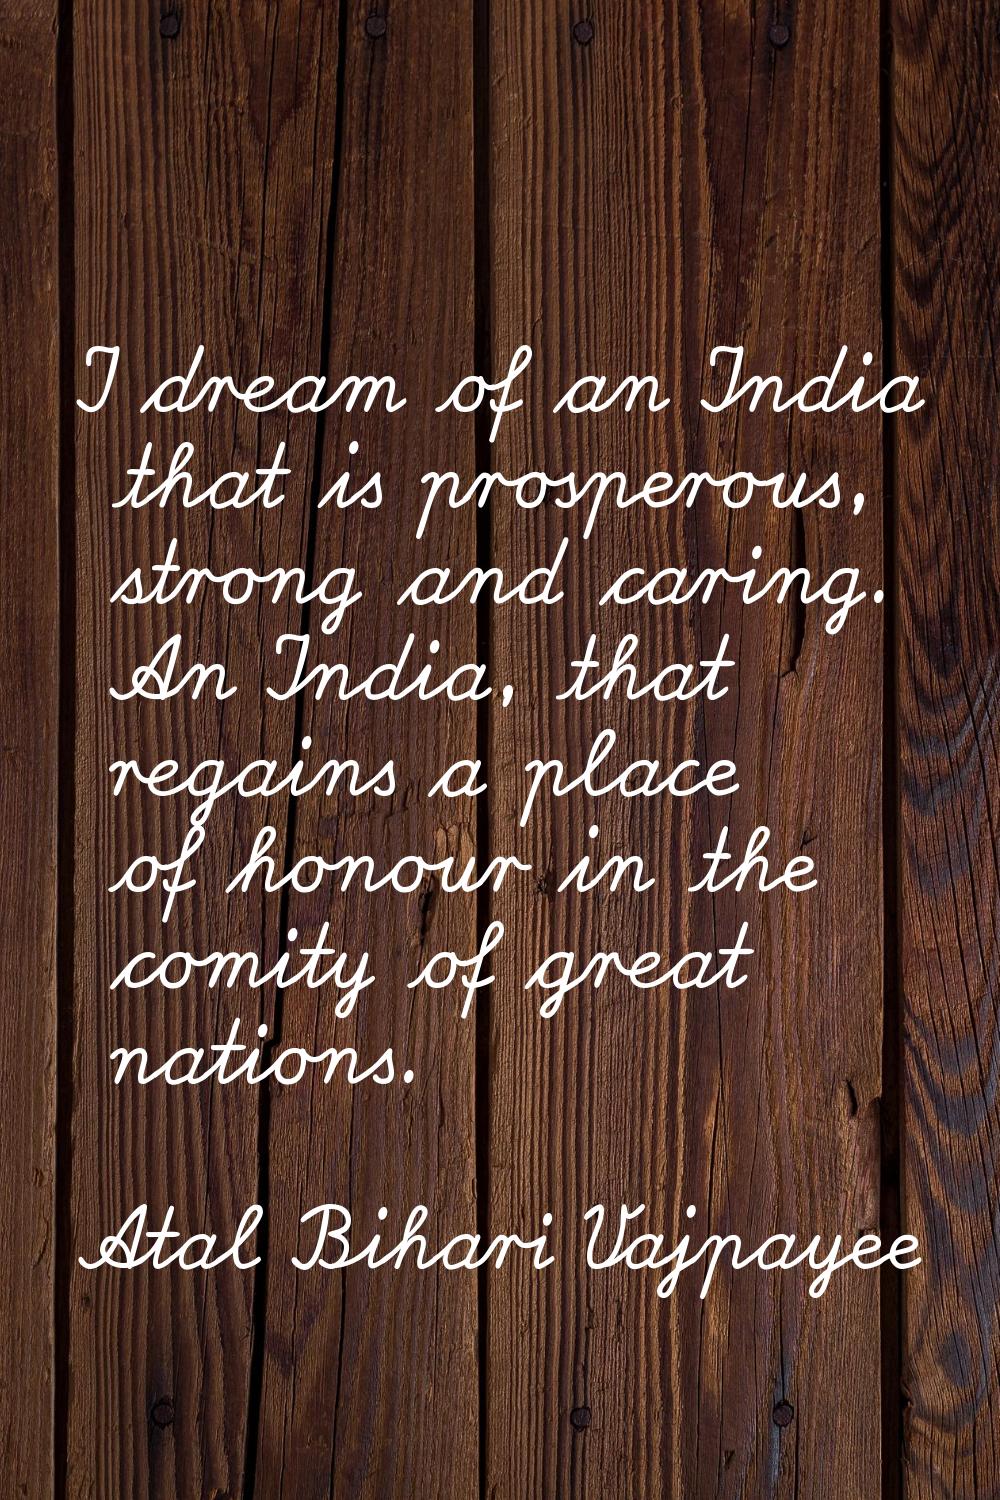 I dream of an India that is prosperous, strong and caring. An India, that regains a place of honour